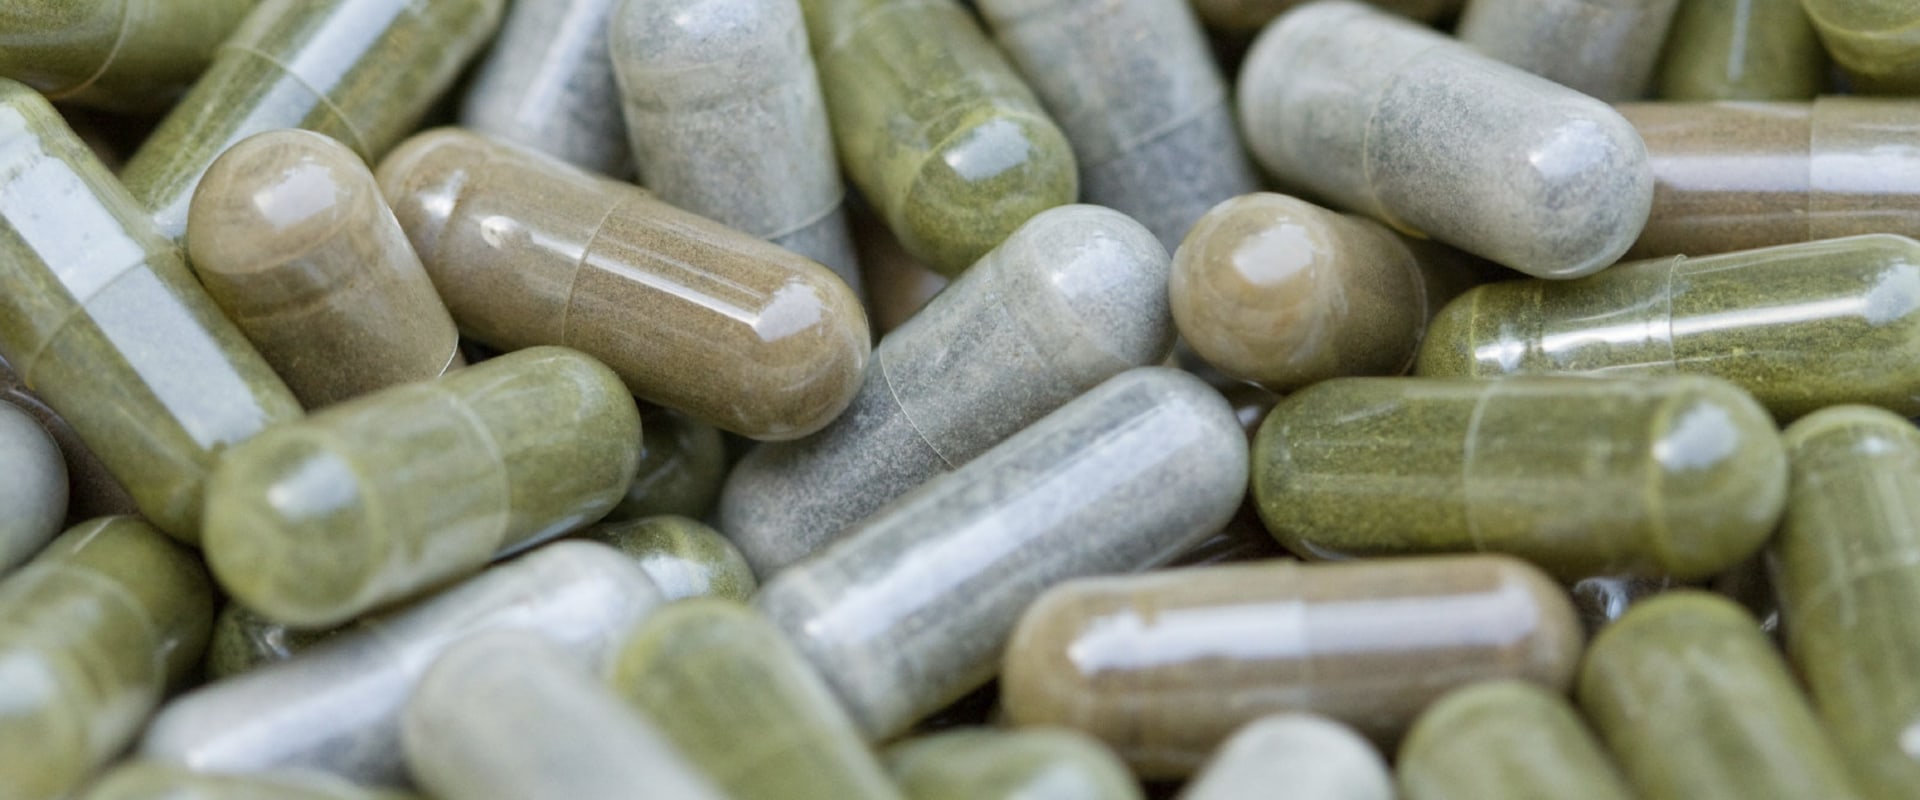 Vitamins vs Supplements: Which is Better for Your Health?